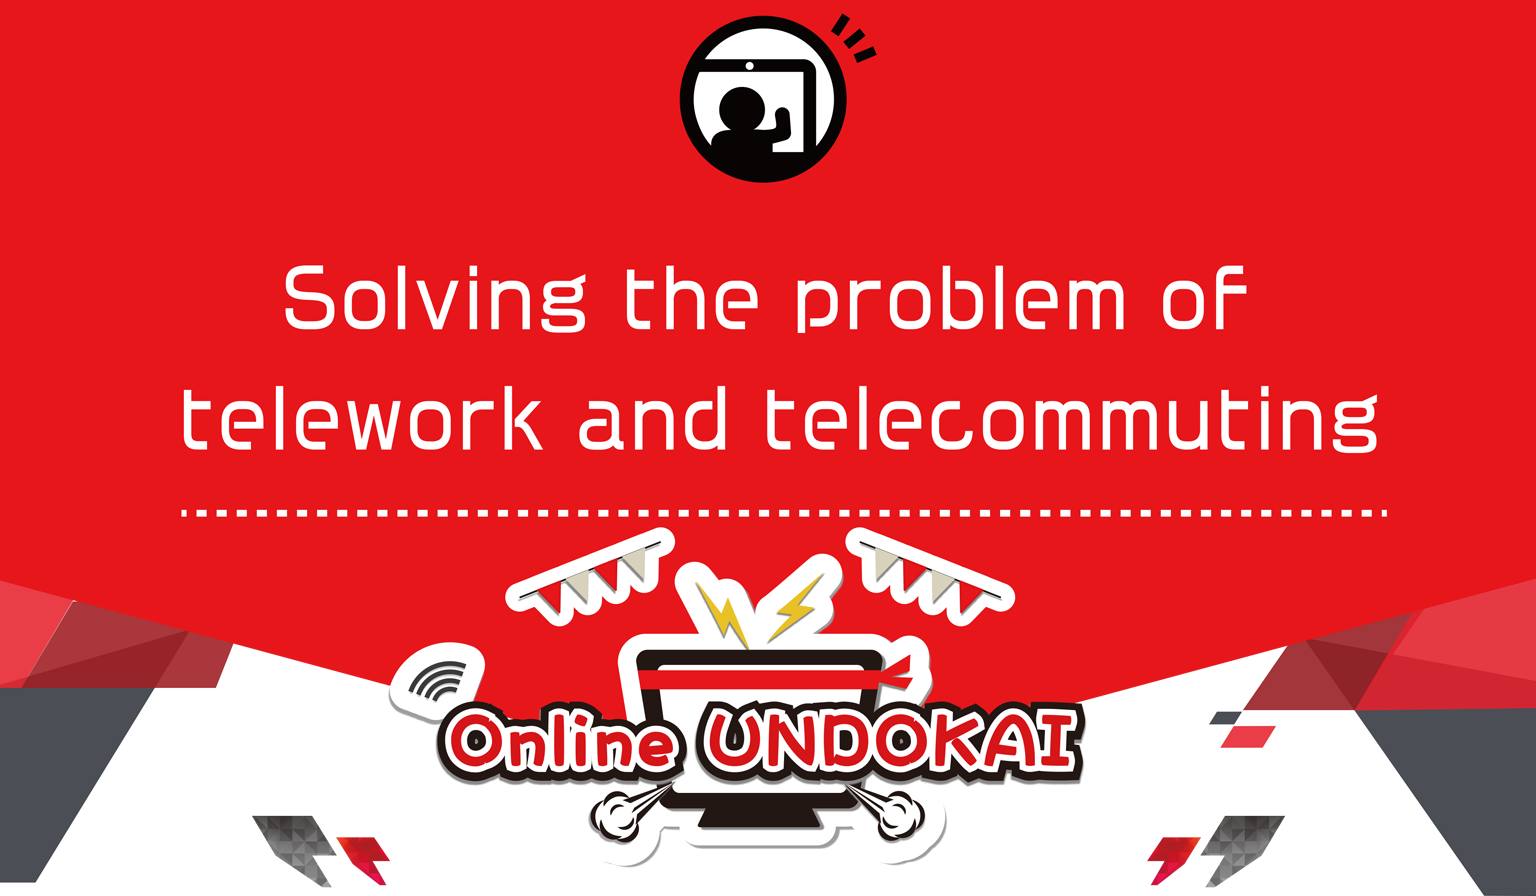 Solving the problem of telework and telecommuting